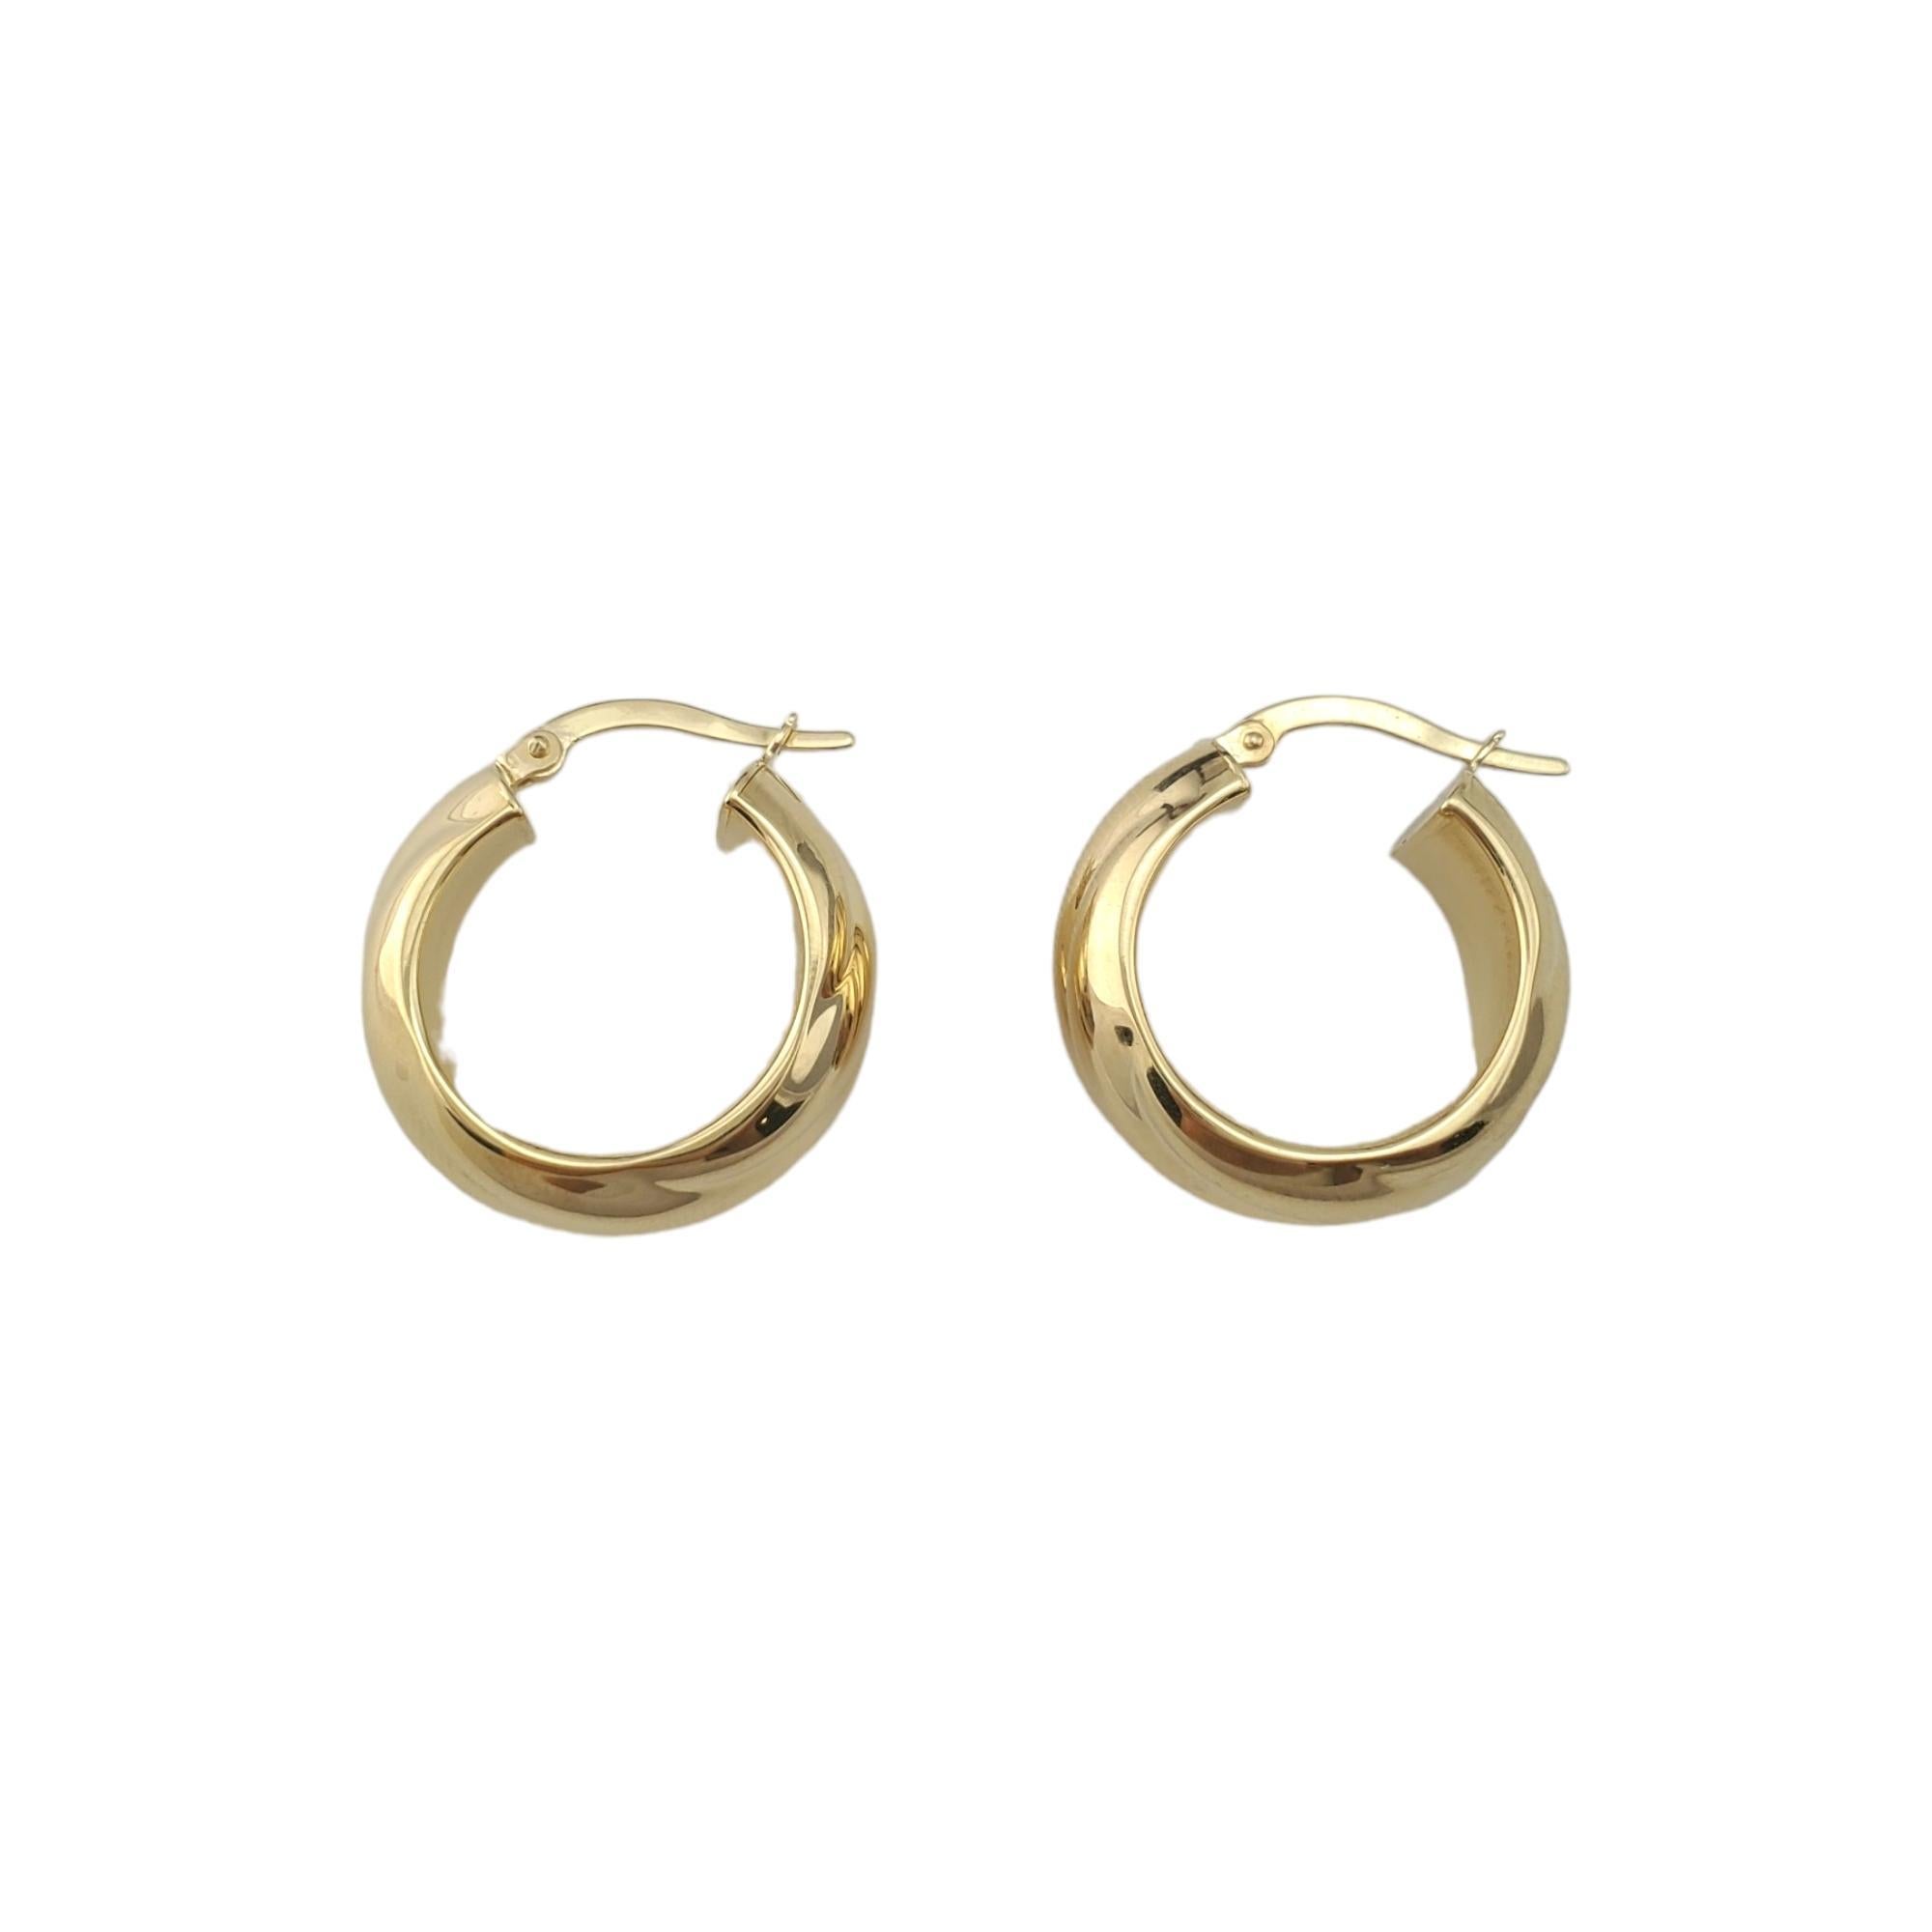 18K Yellow Gold Wide Twisted Hoop Earrings

Thick hoop earrings with twist design in 18K yellow gold.

Hallmark: 750 ITALY Milor

Weight: 3.3 g/ 2.1 dwt. 

Size: 23.0 mm X 9.2 mm X 3.9 mm

Very good condition, professionally polished.

Will come